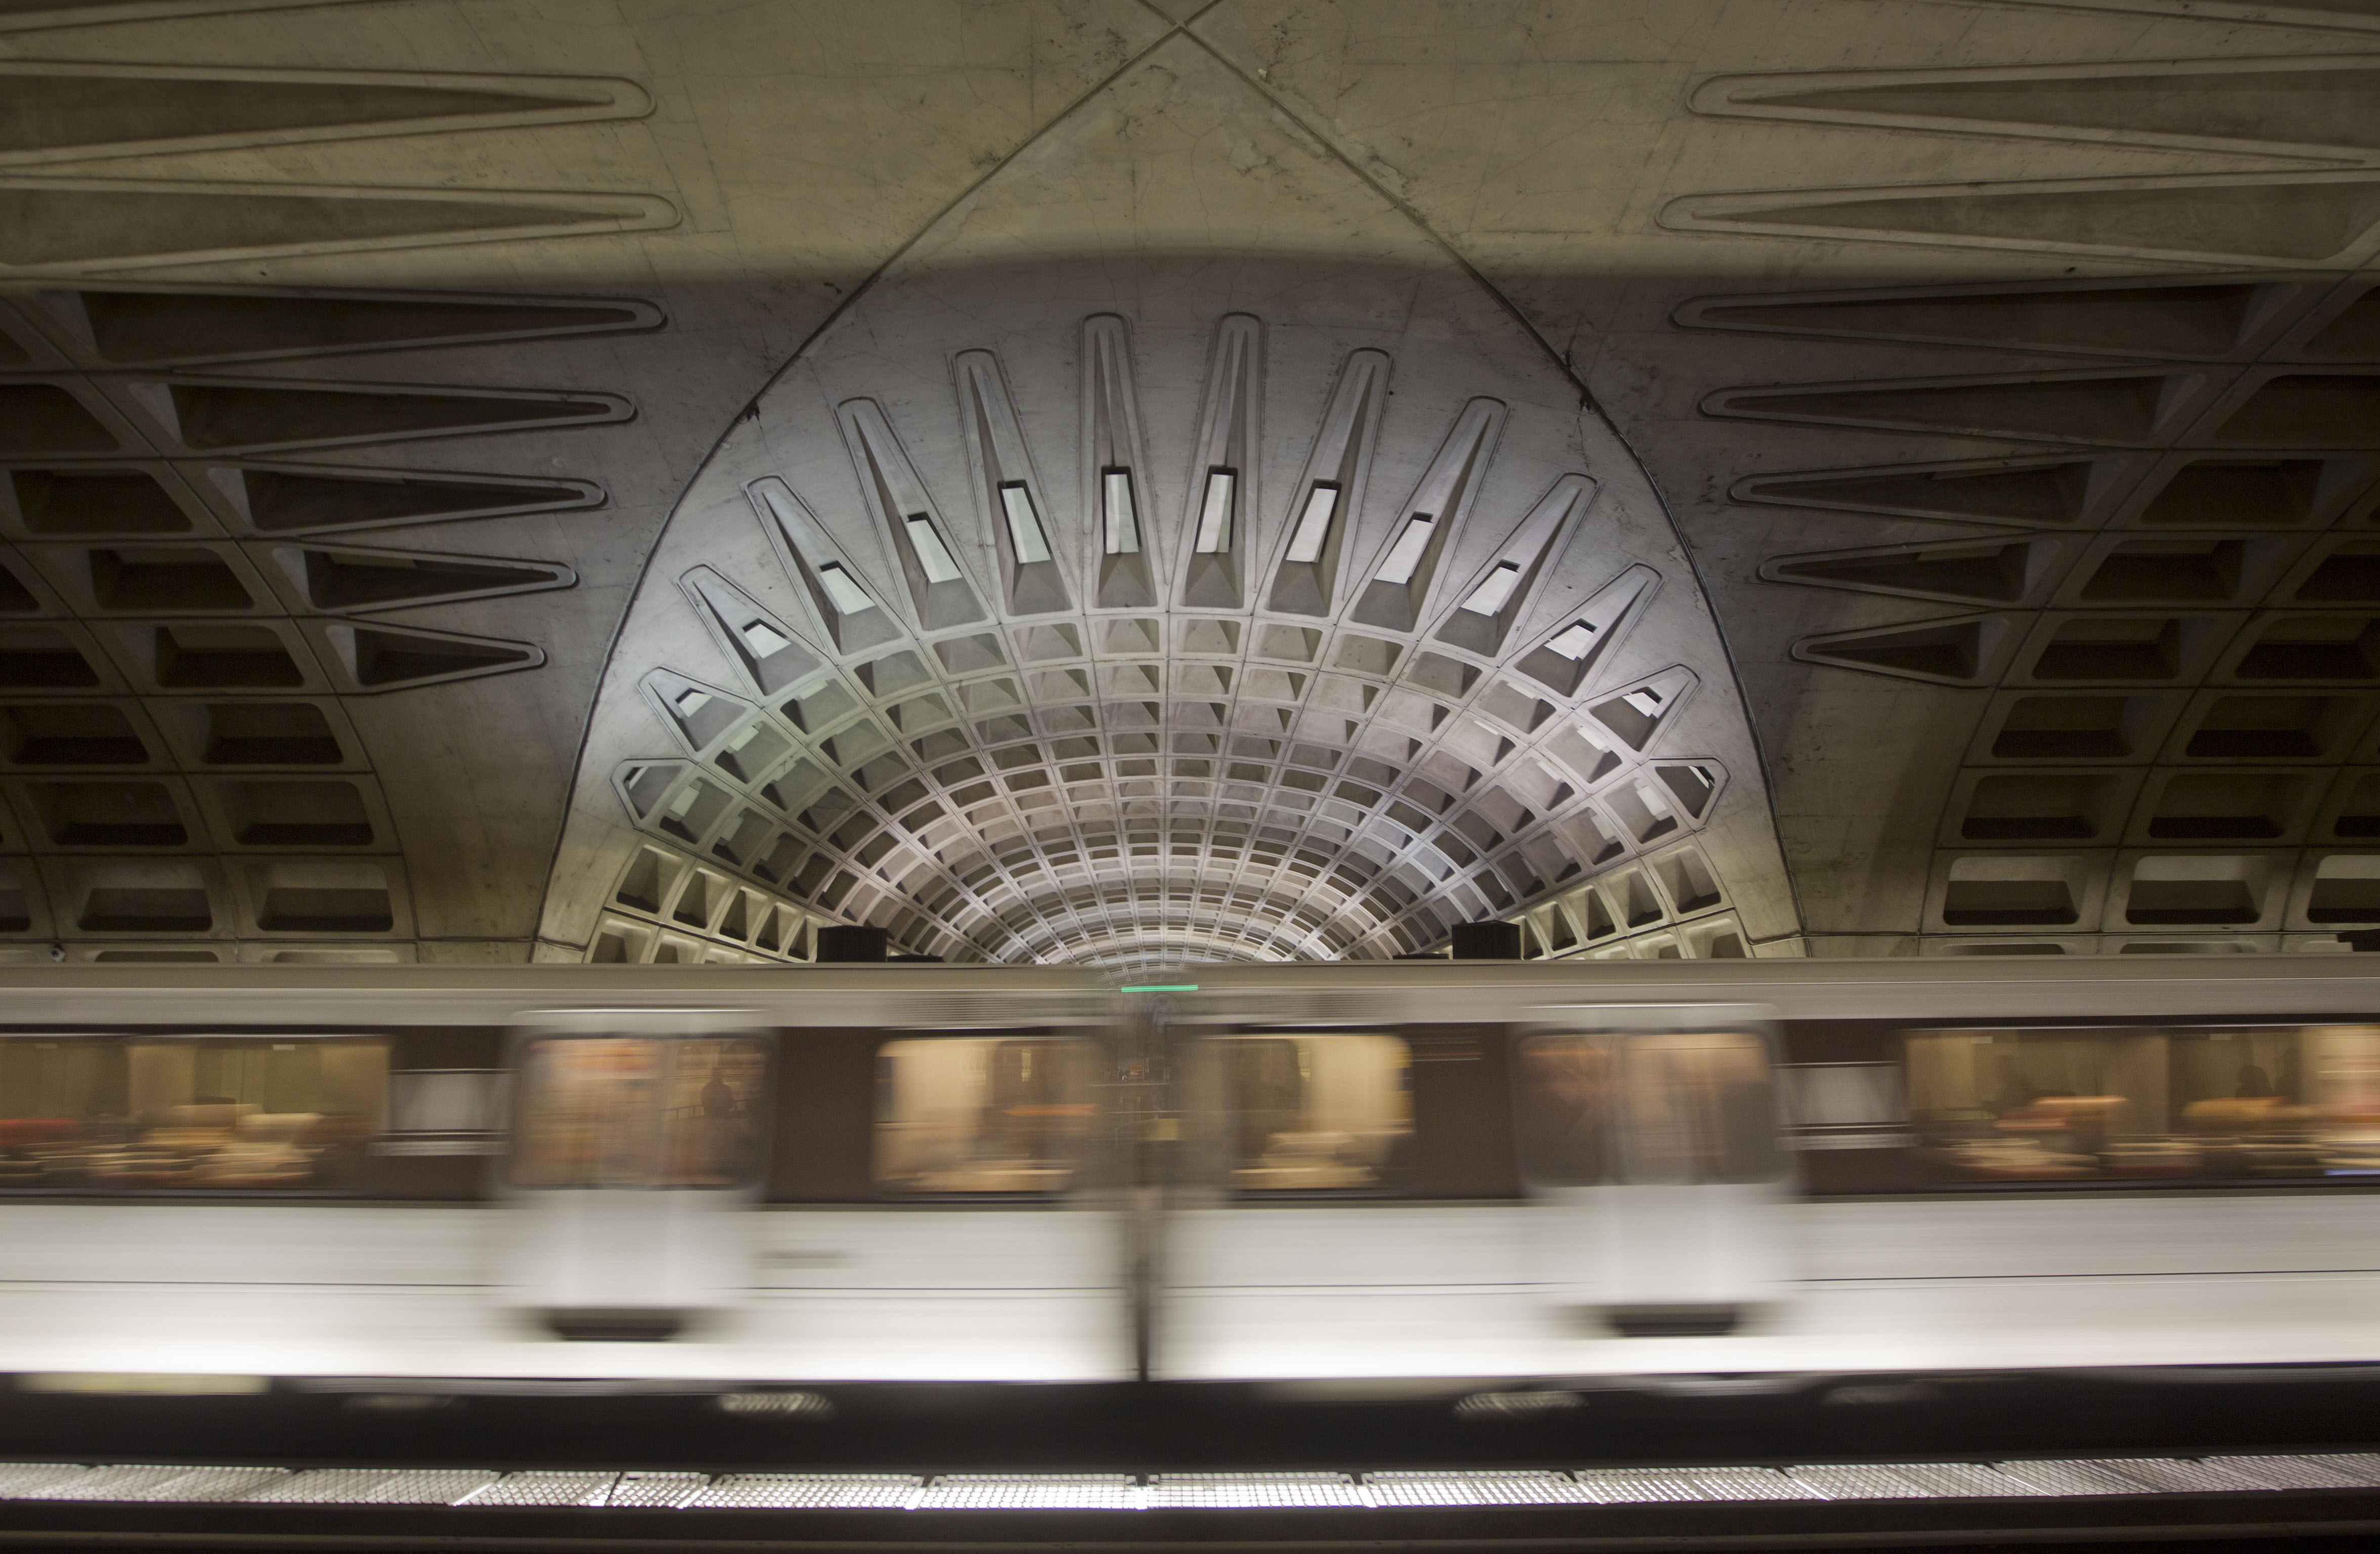 Metro: Power cable flaws not behind Saturday smoke incident